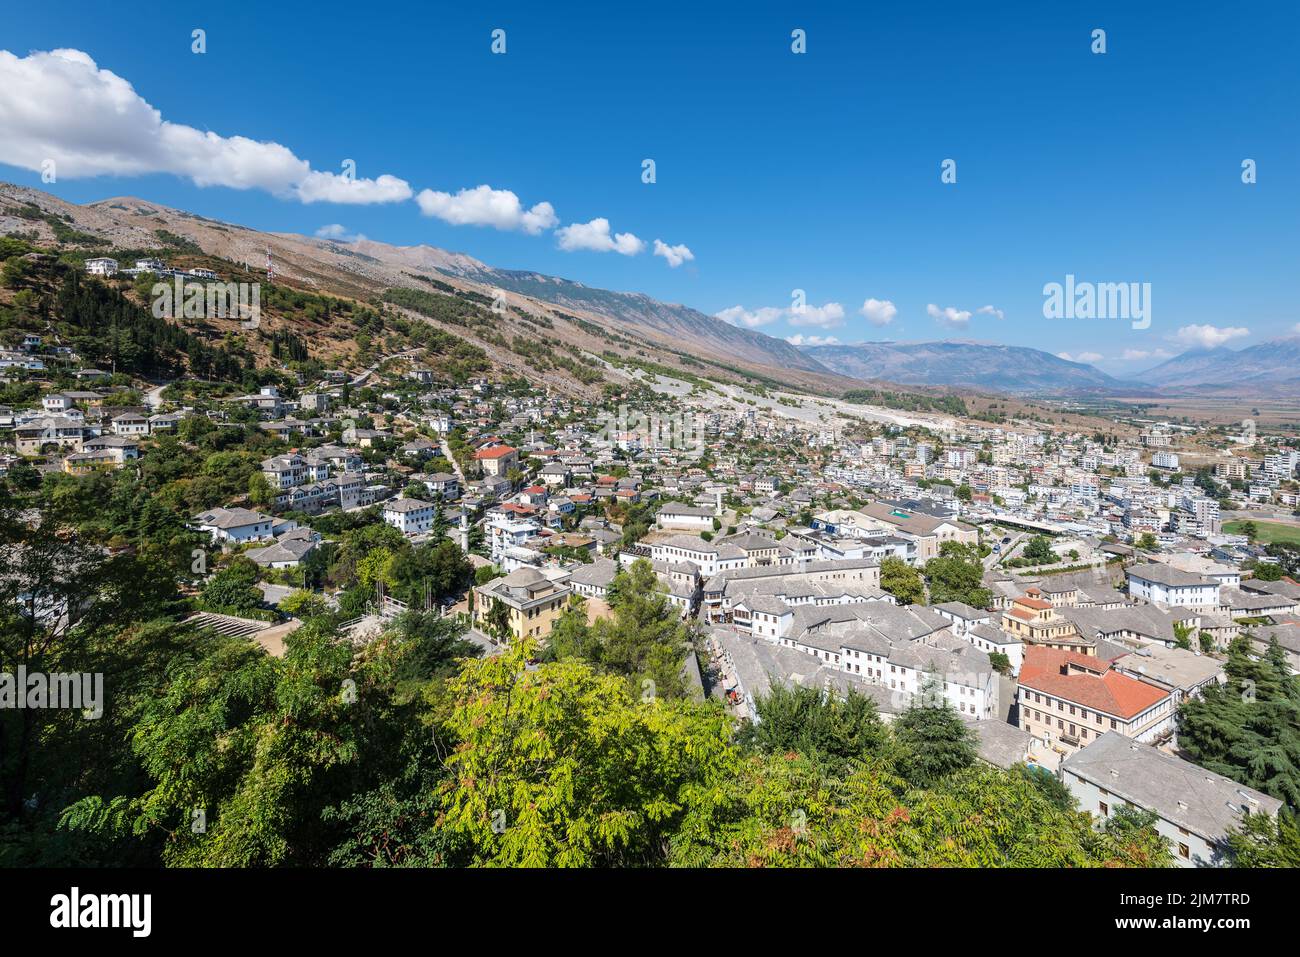 Cityscape of the Old Town of Gjirokaster located on the hills, Albania Stock Photo